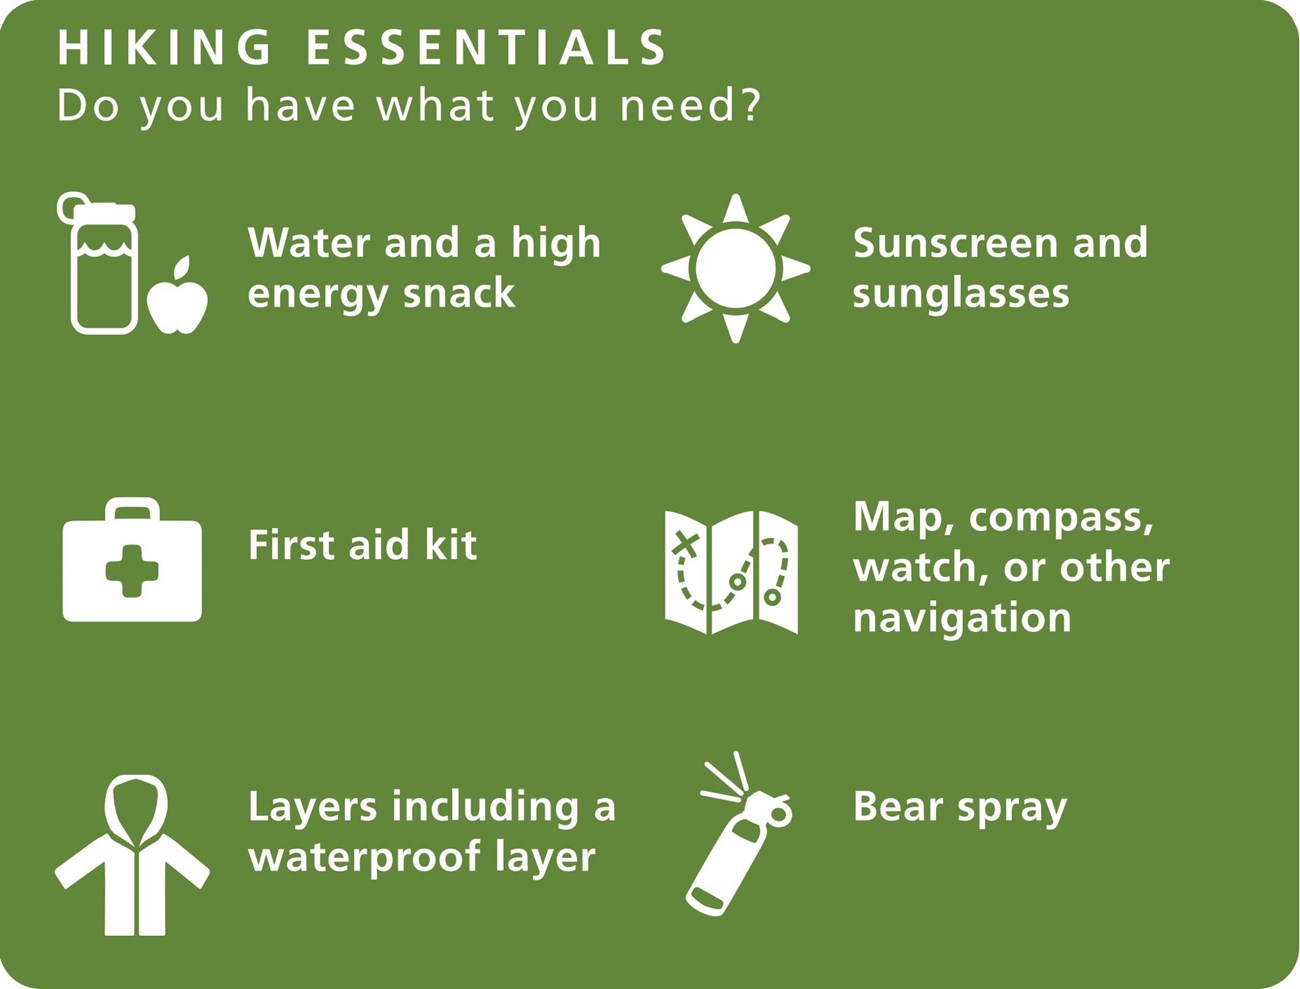 Hiking Essentials graphic: Do you have what you need? 1. Water and a high energy snack 2. First aid kit 3. Layers, including a waterproof layer 4. Sunscreen and sunglasses 5. Map, compass, watch, or other navigation 6. Bear spray